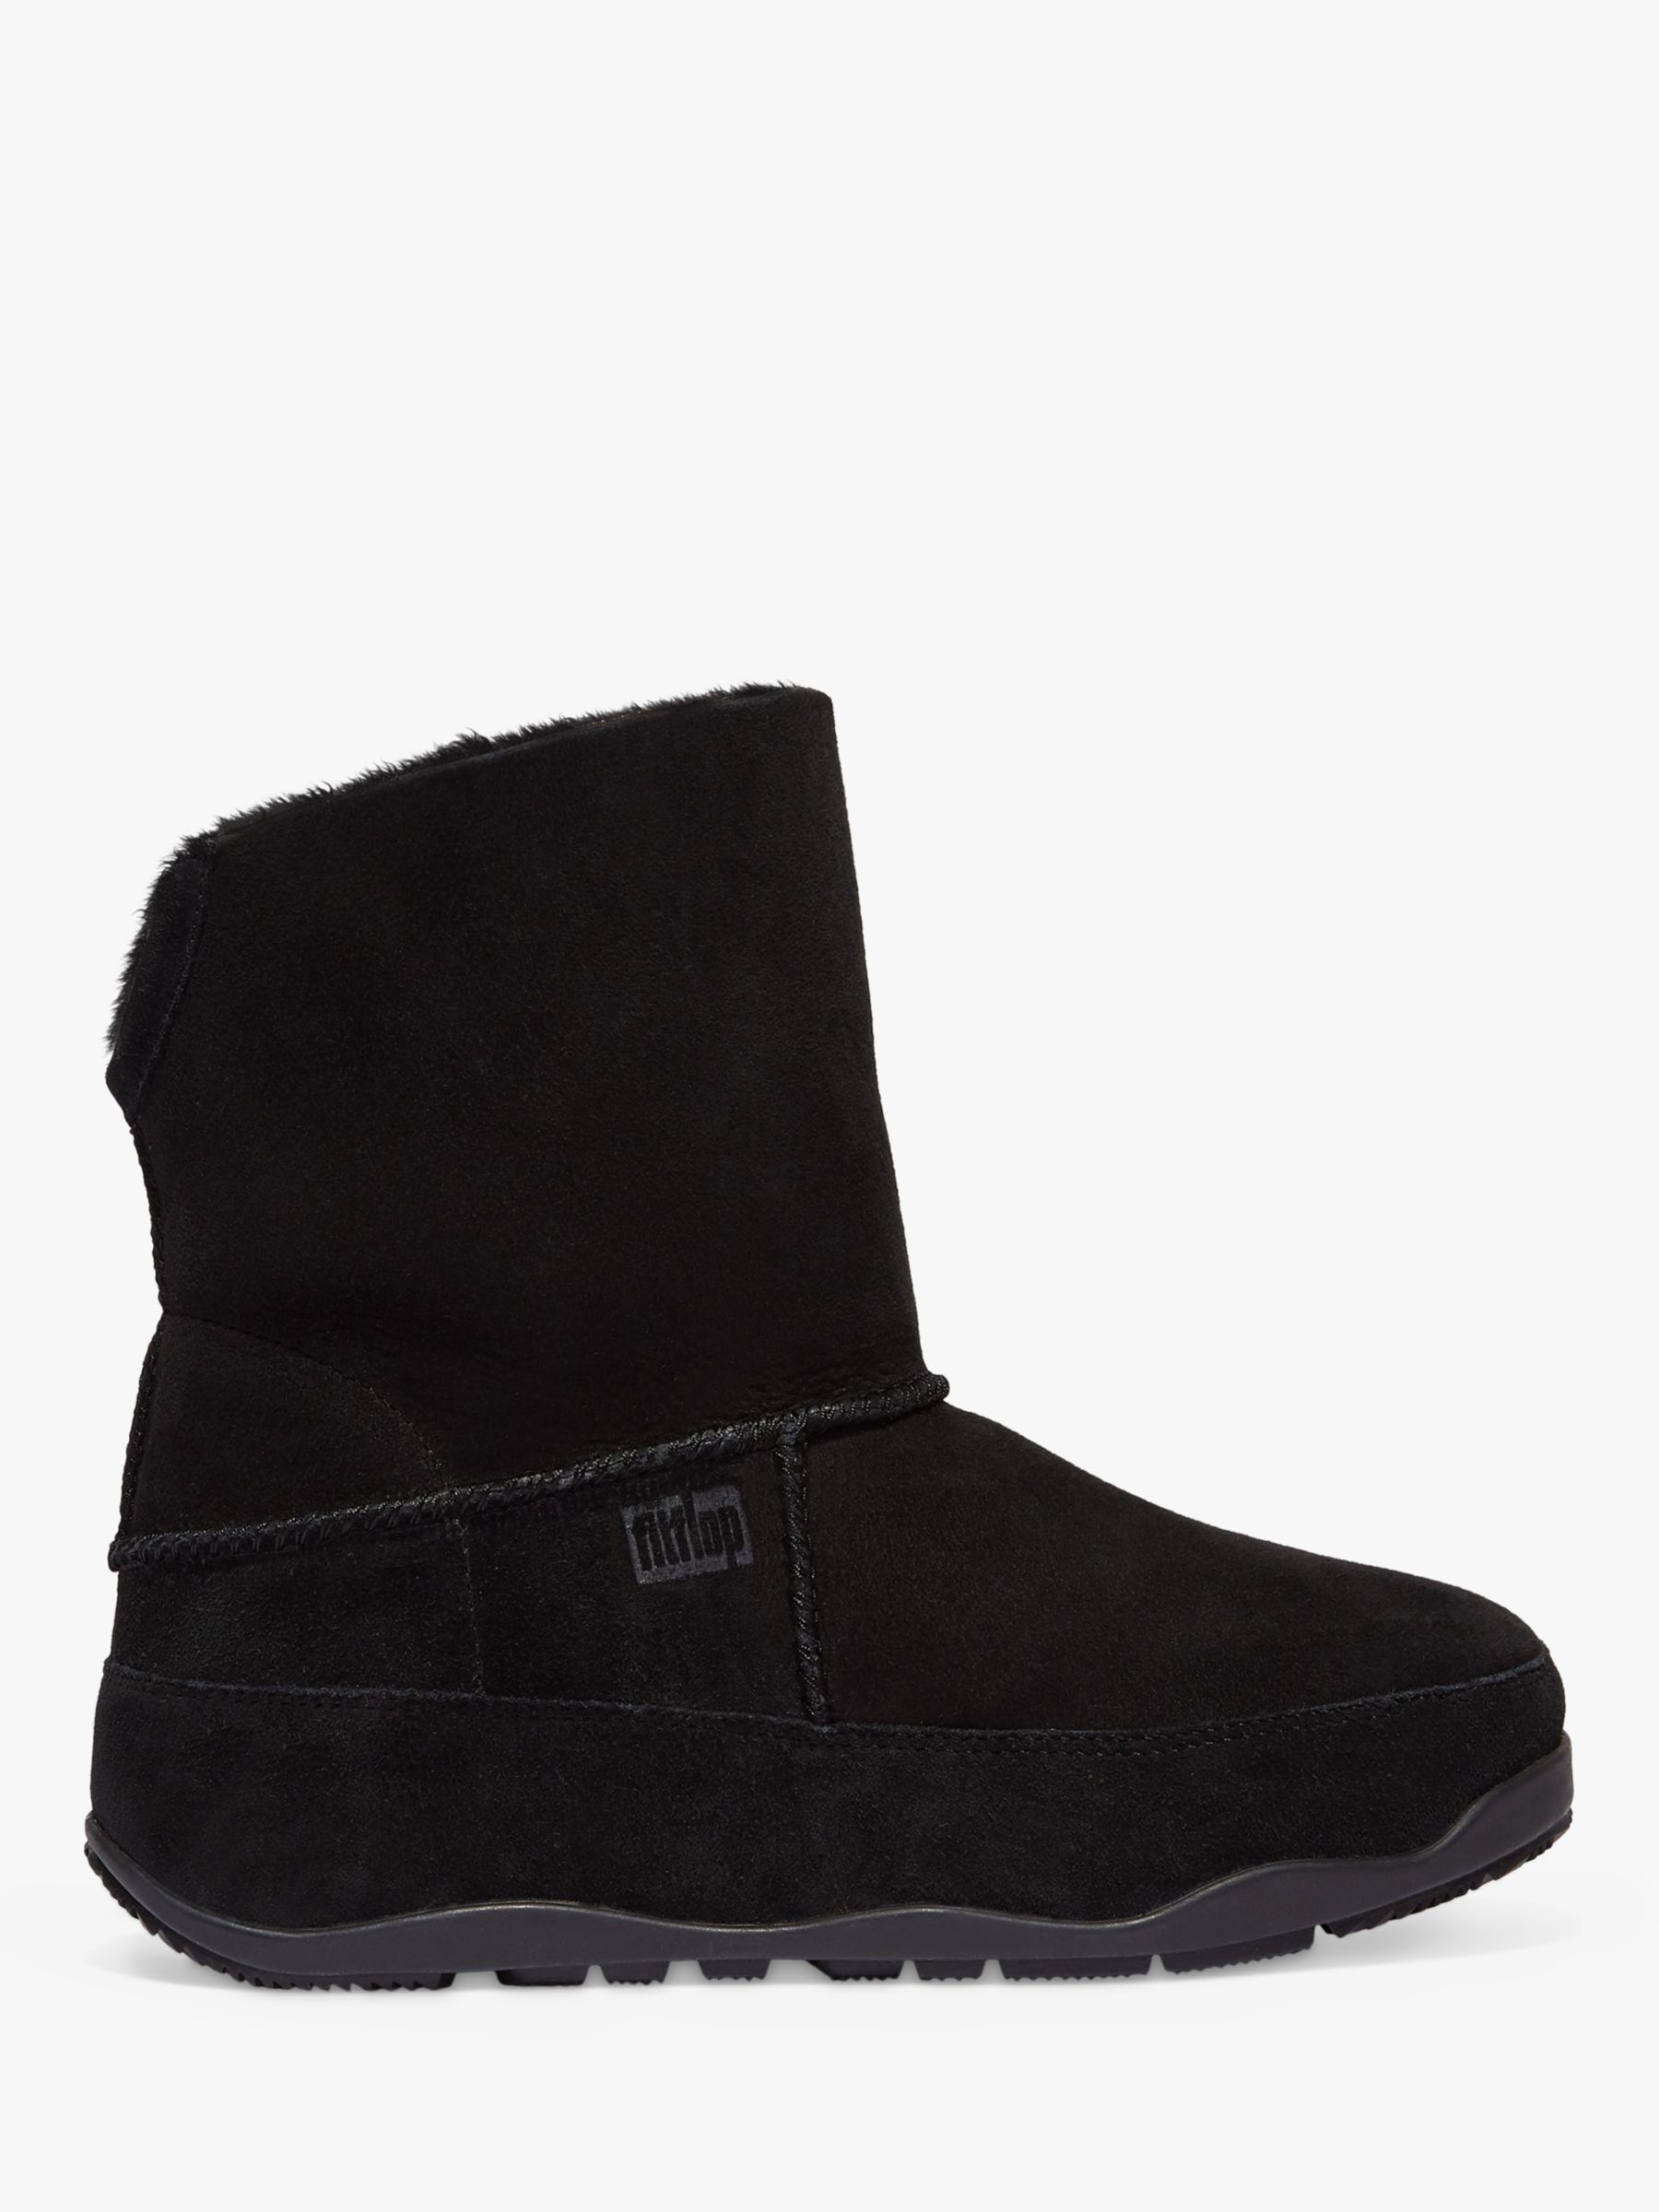 FitFlop Mukluk Suede Ankle Boots, All Black at John Lewis & Partners